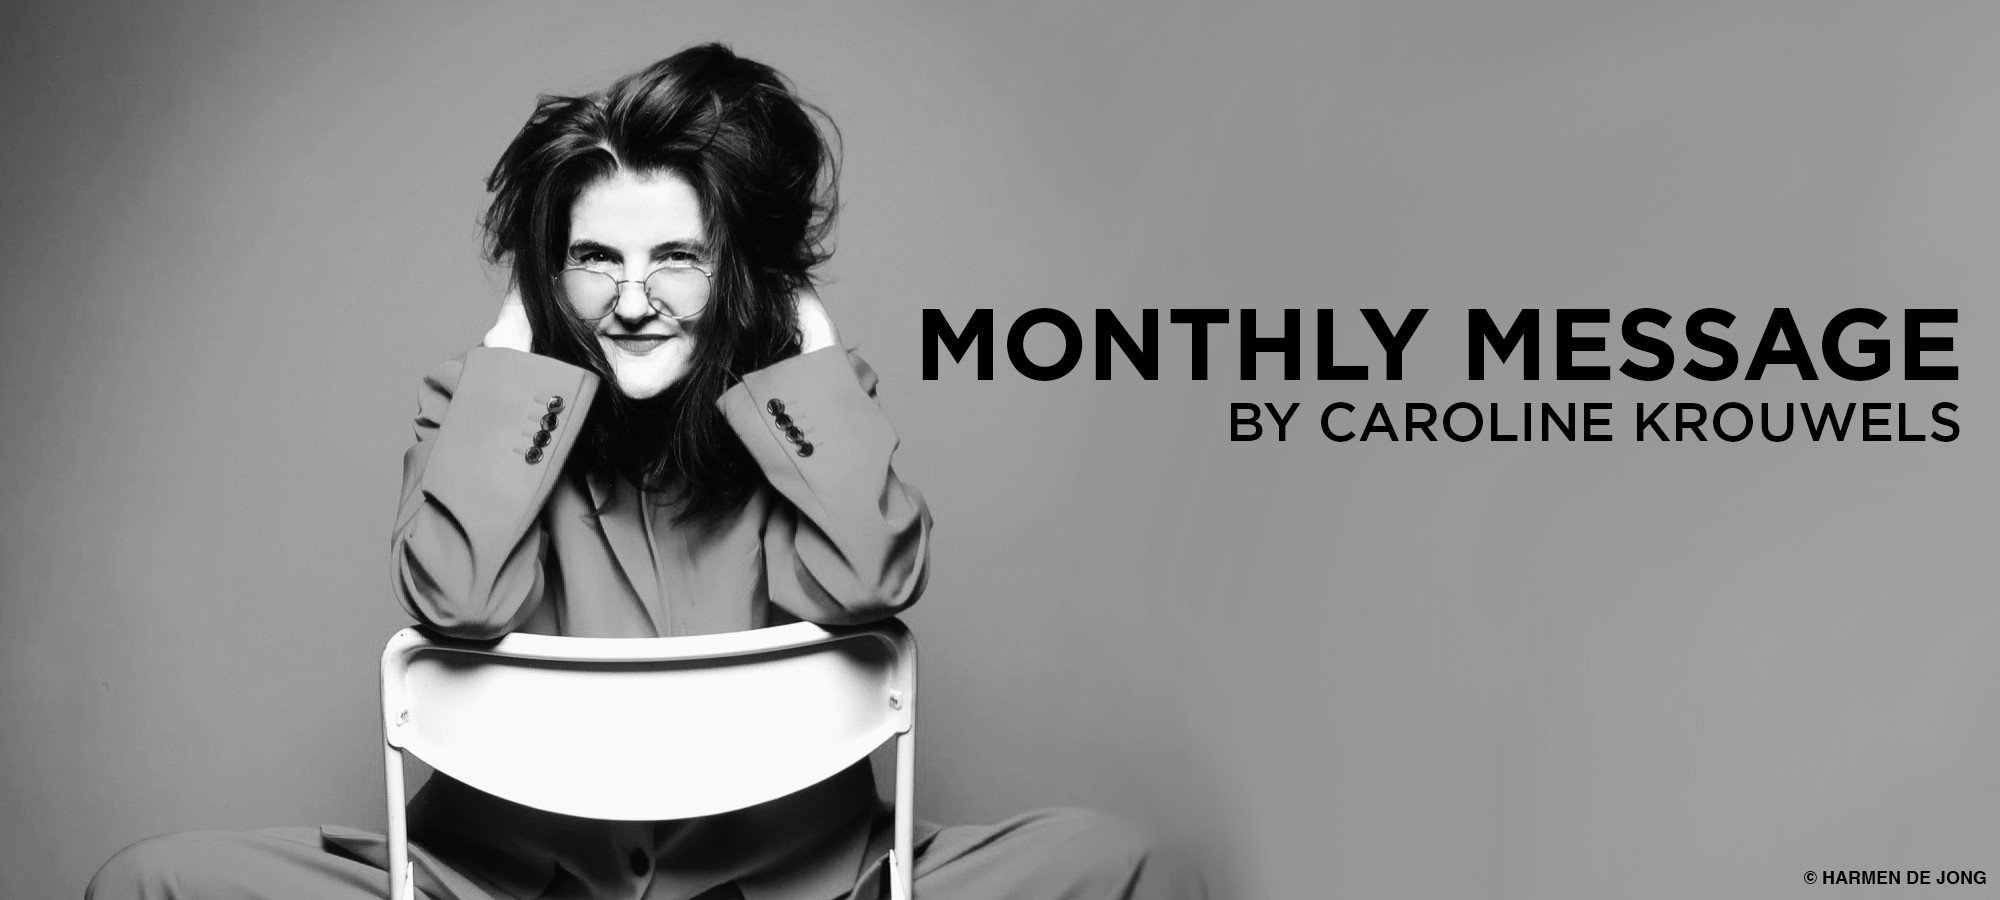 Caroline's Monthly Message: Daily Inspiration